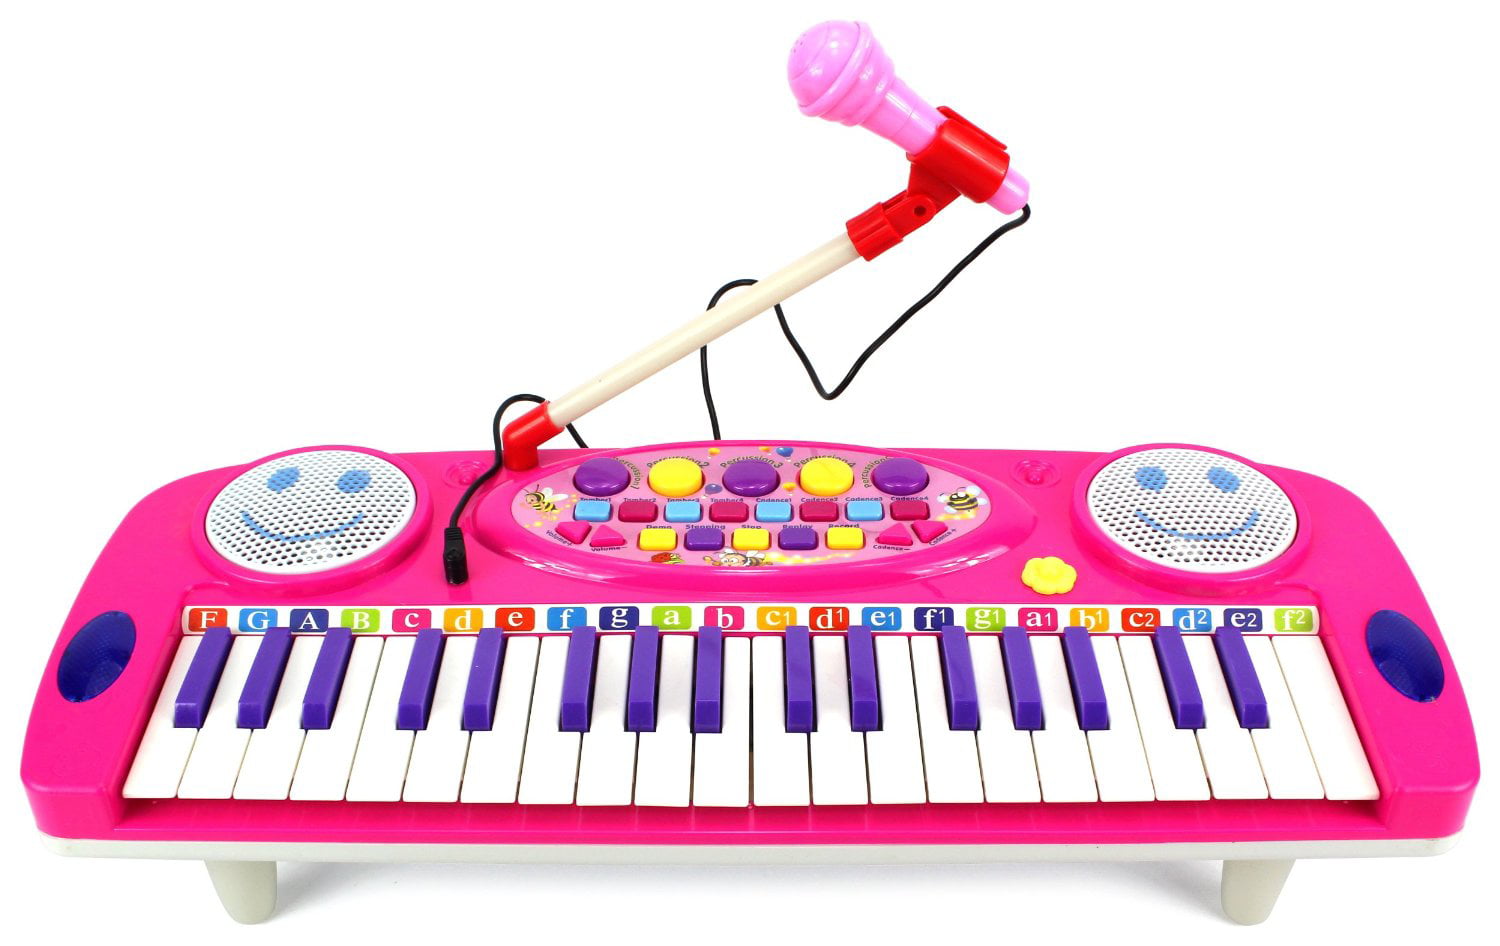 New Pink keyboard toy-lights & sounds musical fun for all ages-electronic organ 